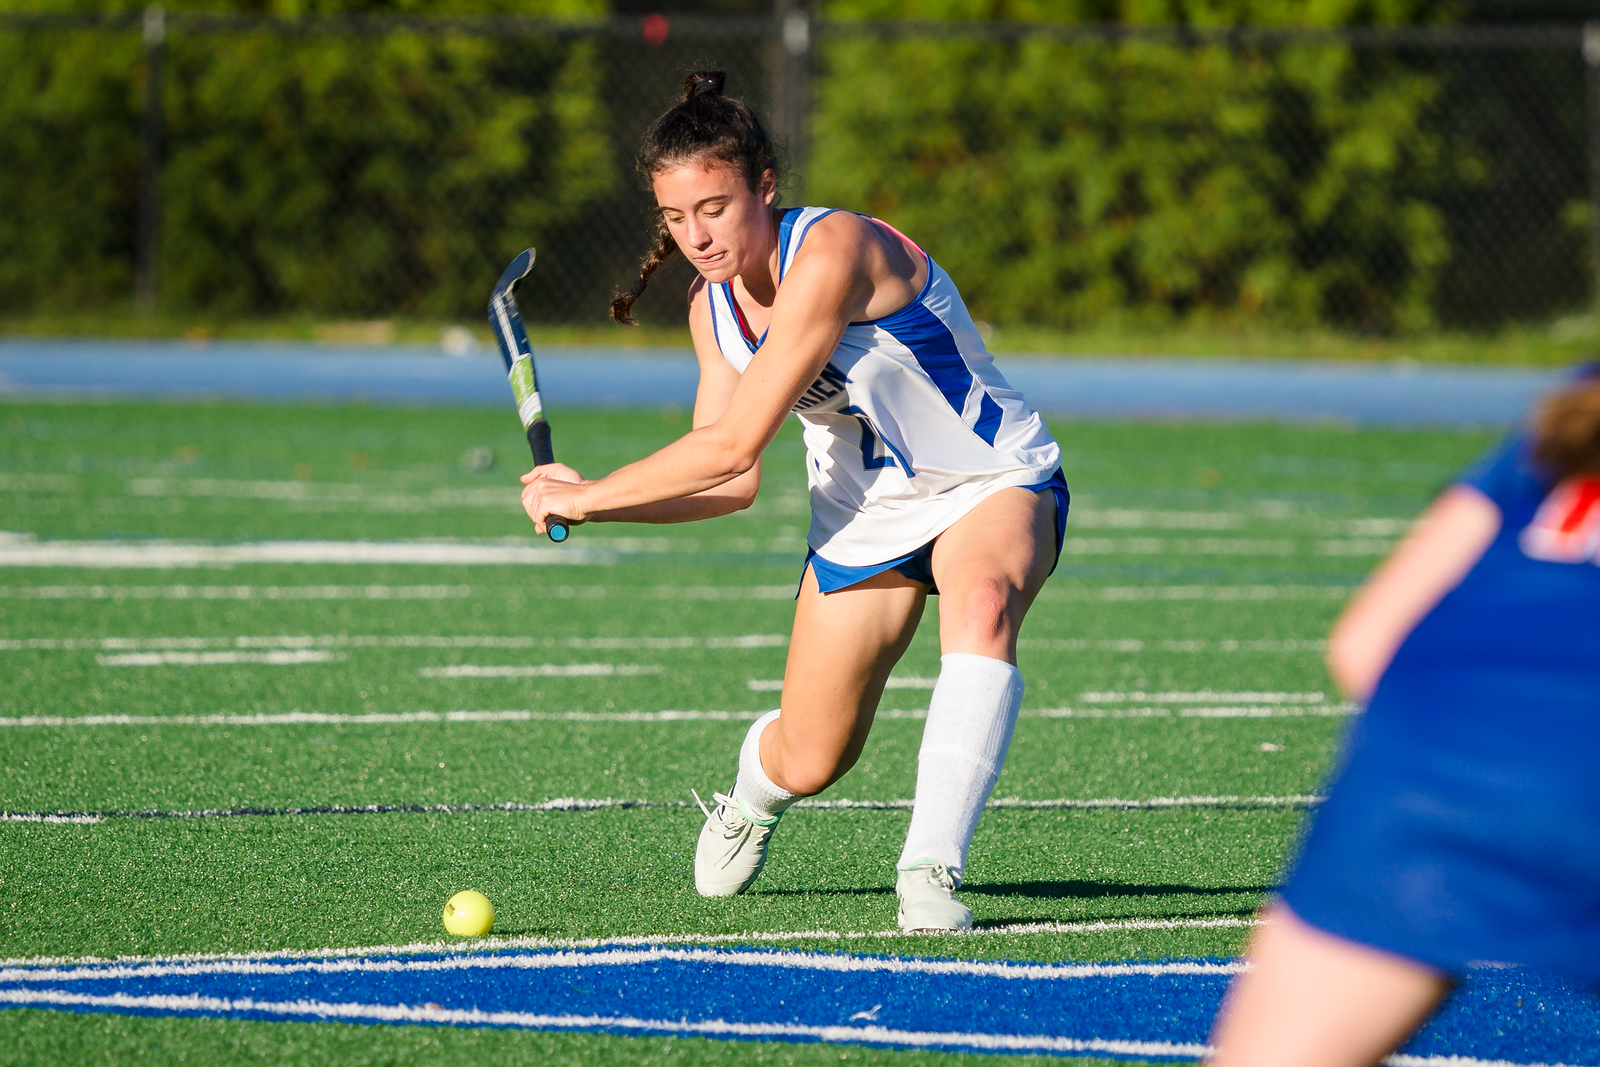 field hockey player about to strike ball